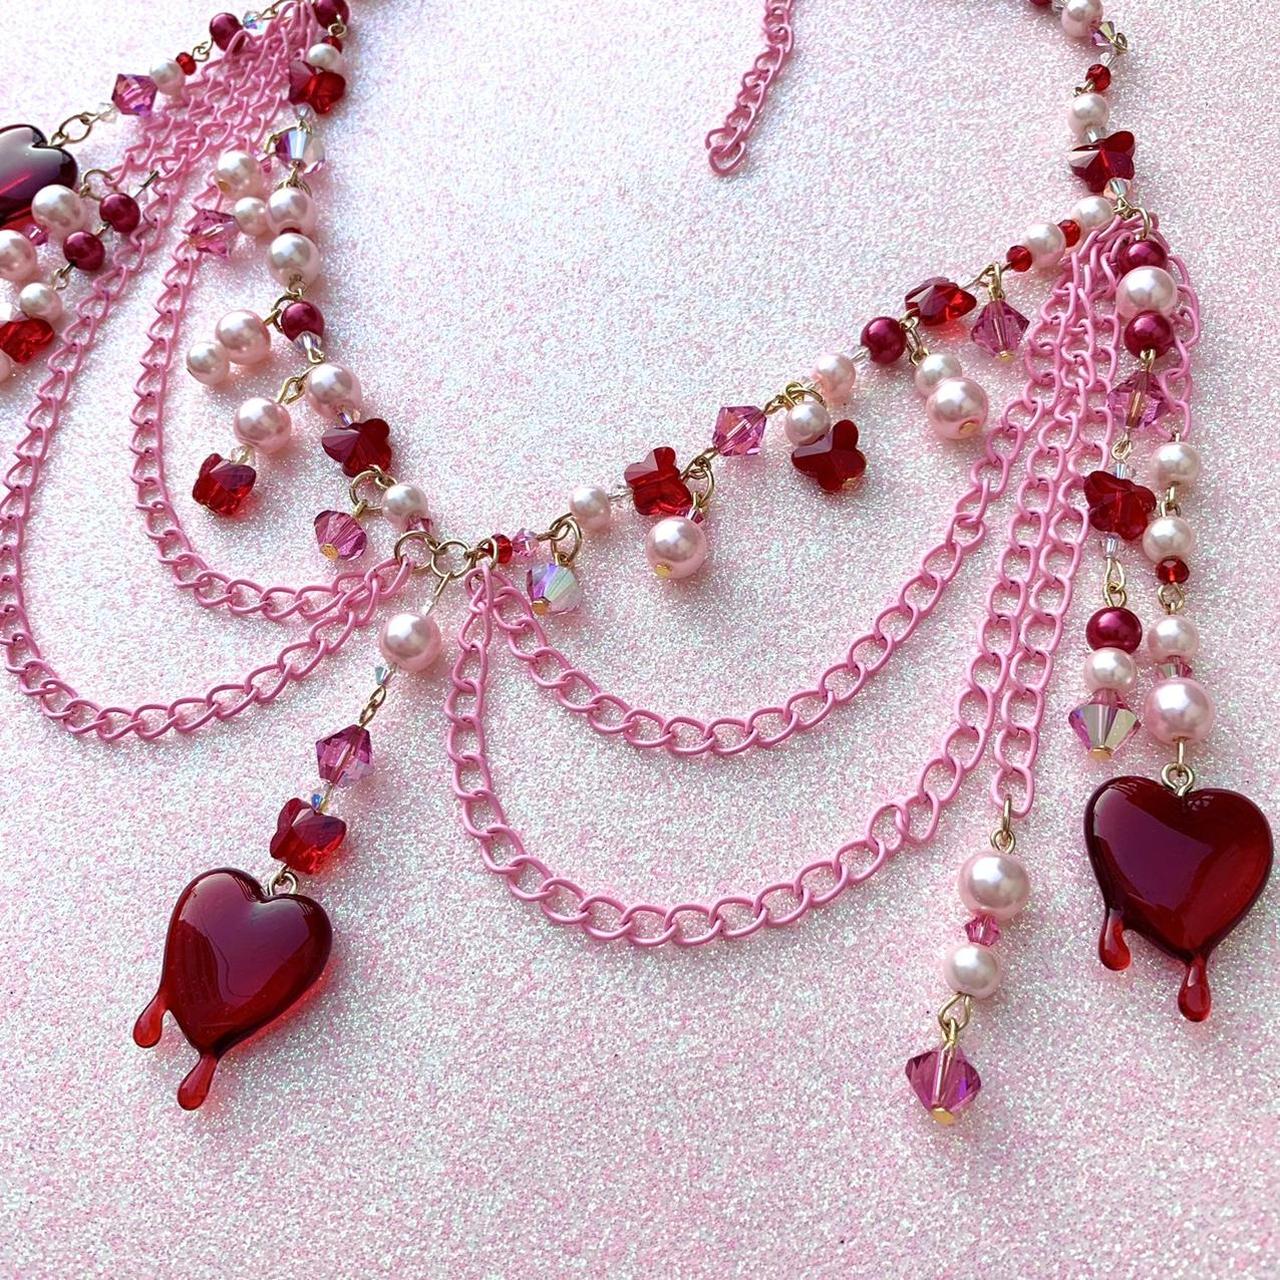 Sugarpill Women's Pink and Red Jewellery (2)